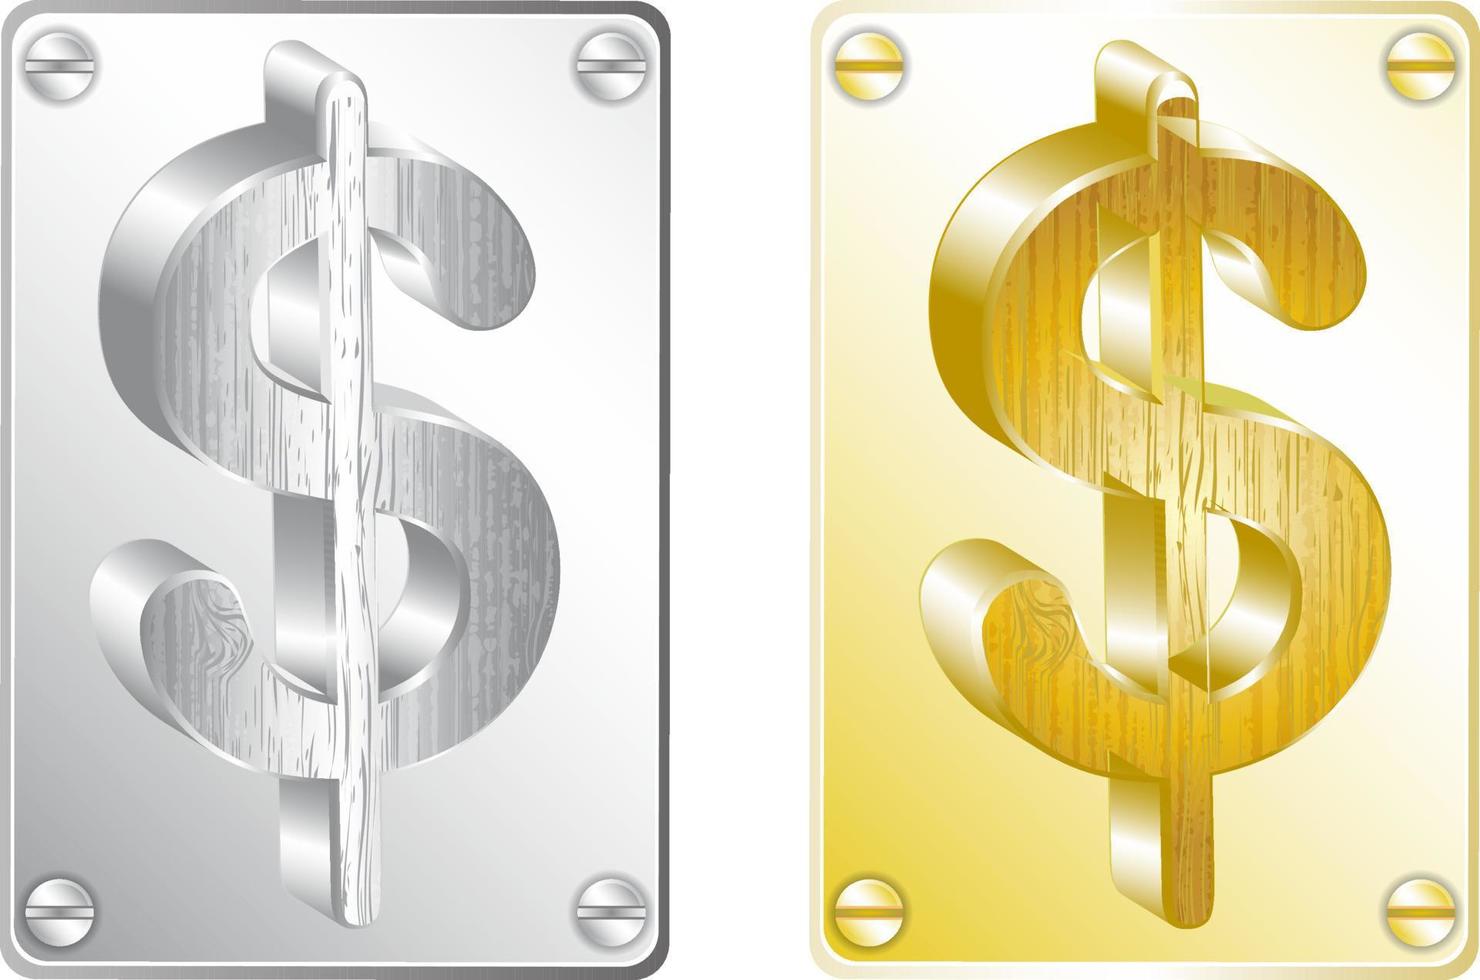 gold and silver dollar currency symbol vector